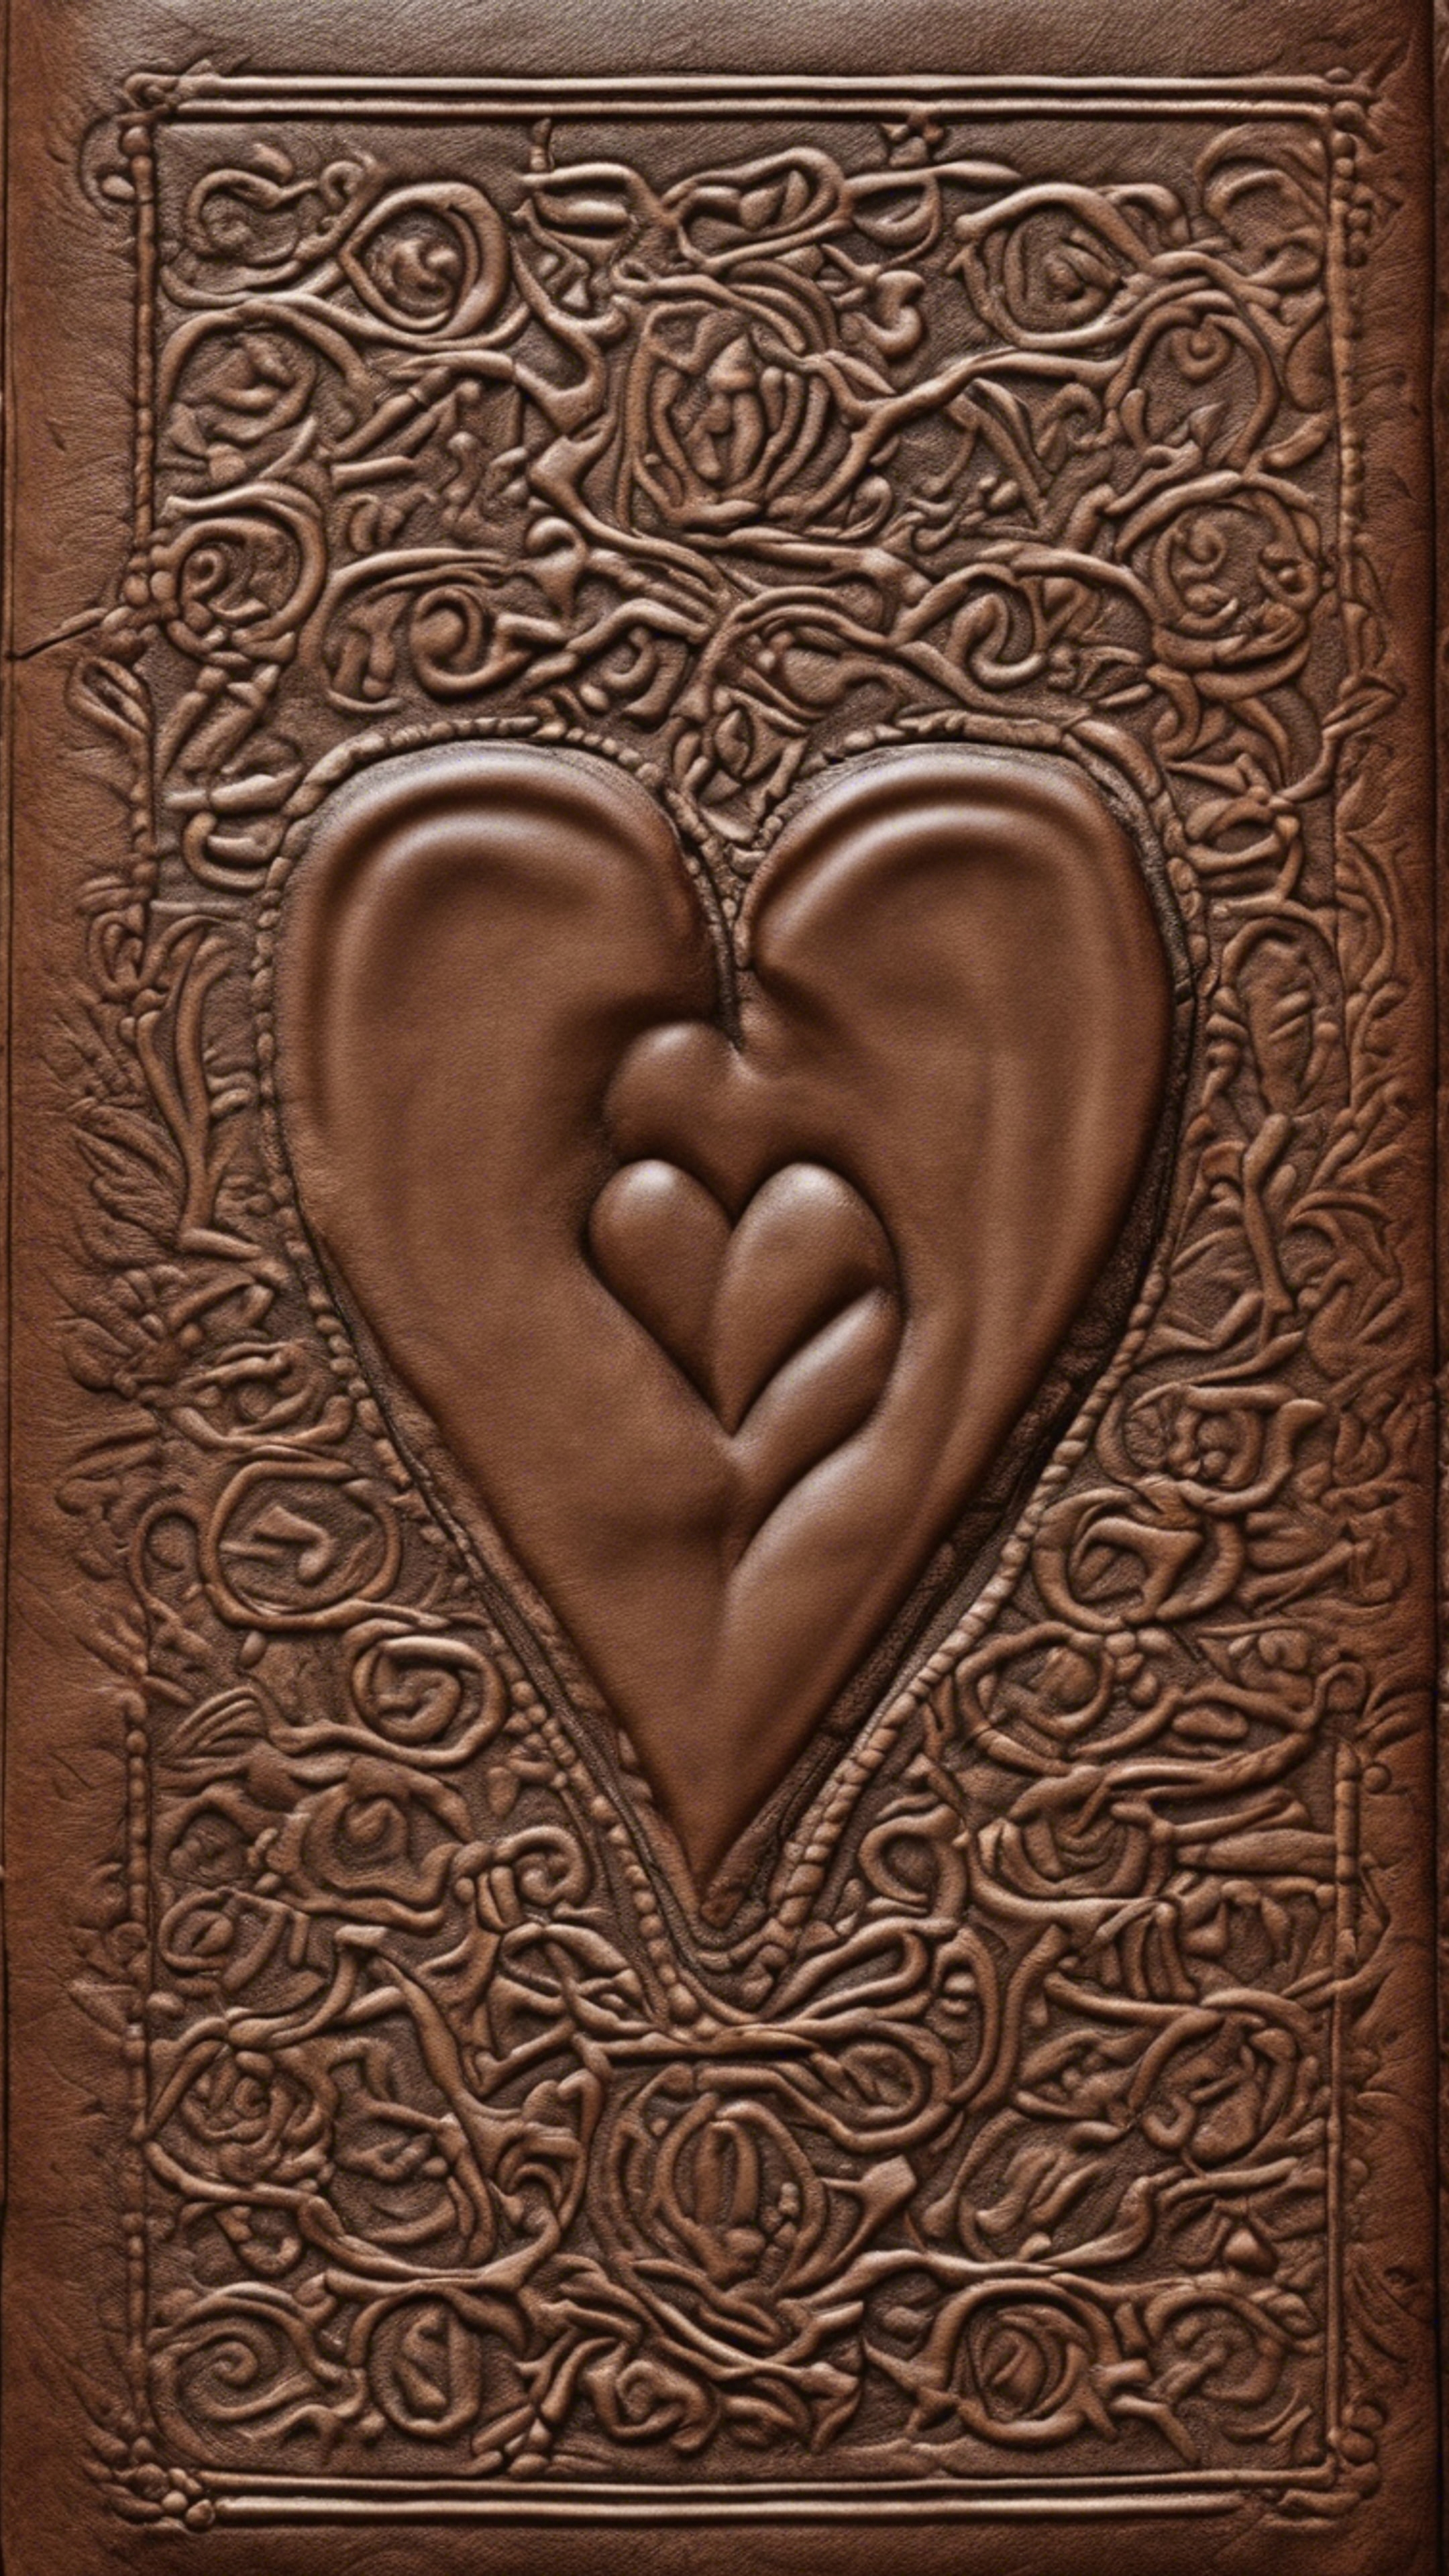 A heart pattern engraved on a brown leather-bound book from the 18th century.壁紙[77bbf1d18d454c5f8334]